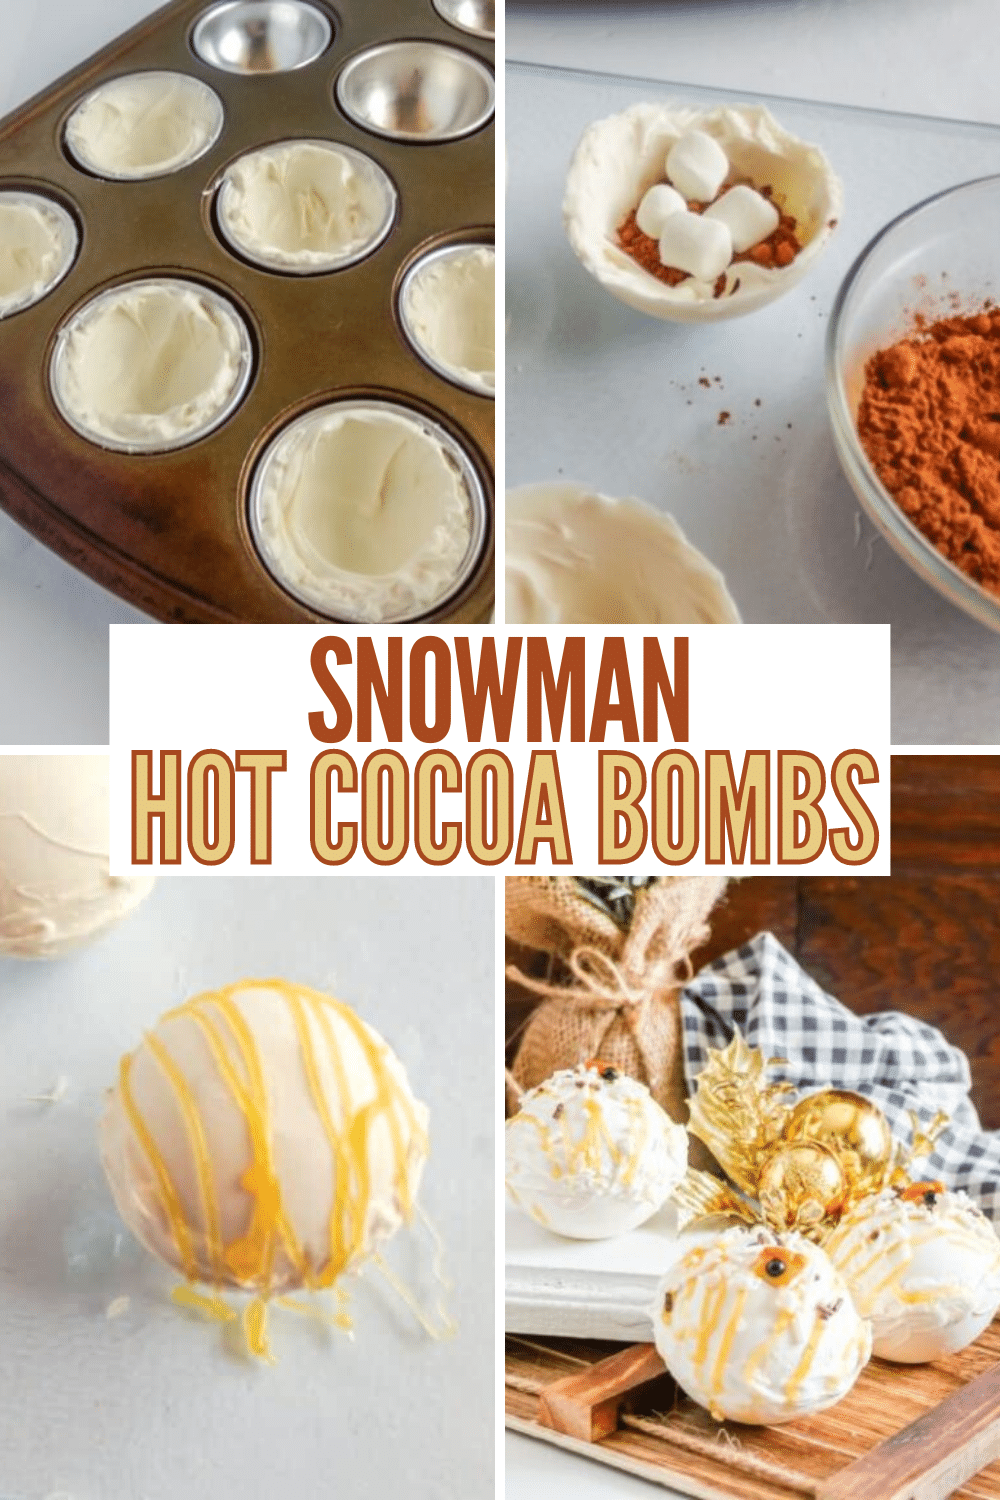 If you're looking for an awesome new treat, don't miss out on these Snowman Hot Cocoa Bombs! Perfect for your hot chocolate cravings! #snowman #hotcocoa #hotcocoabombs via @wondermomwannab